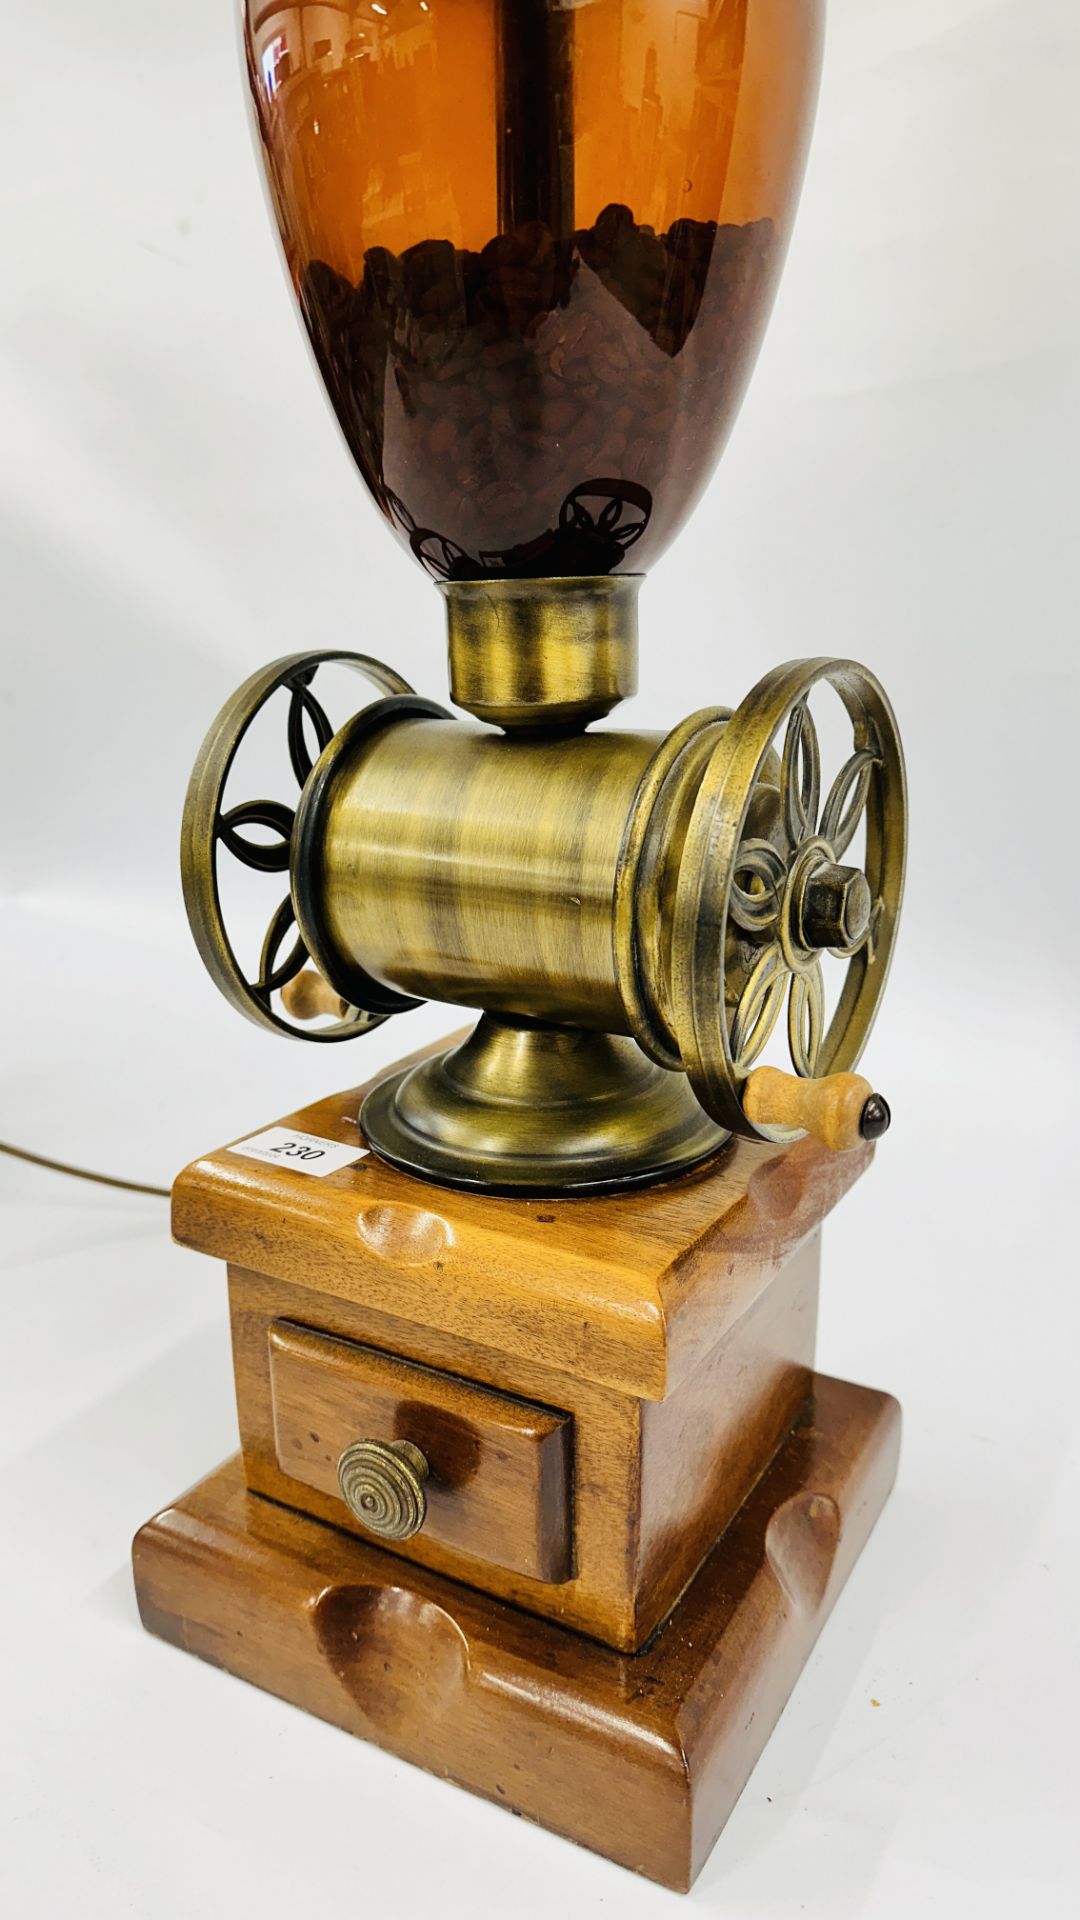 A VINTAGE NOVELTY CONVERTED TABLE LAMP IN THE FORM OF A COFFEE GRINDER WITH SHADE - SOLD AS SEEN. - Image 3 of 5